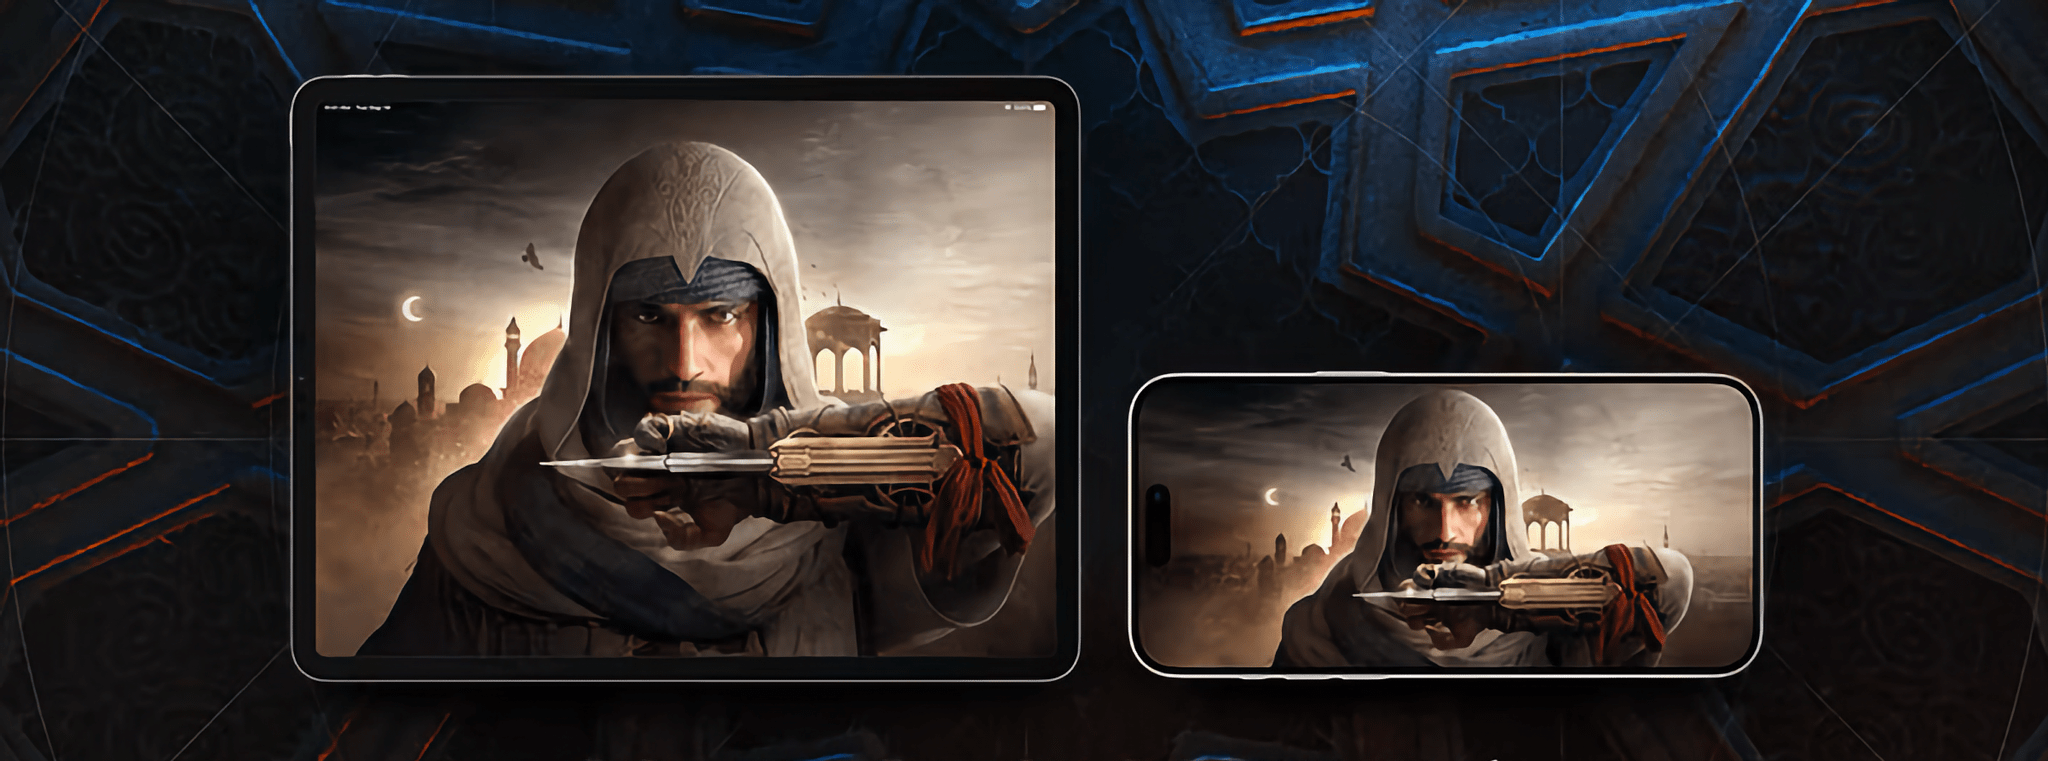 Assassin’s Creed Mirage Is Coming to iPhones and iPads on June 6th